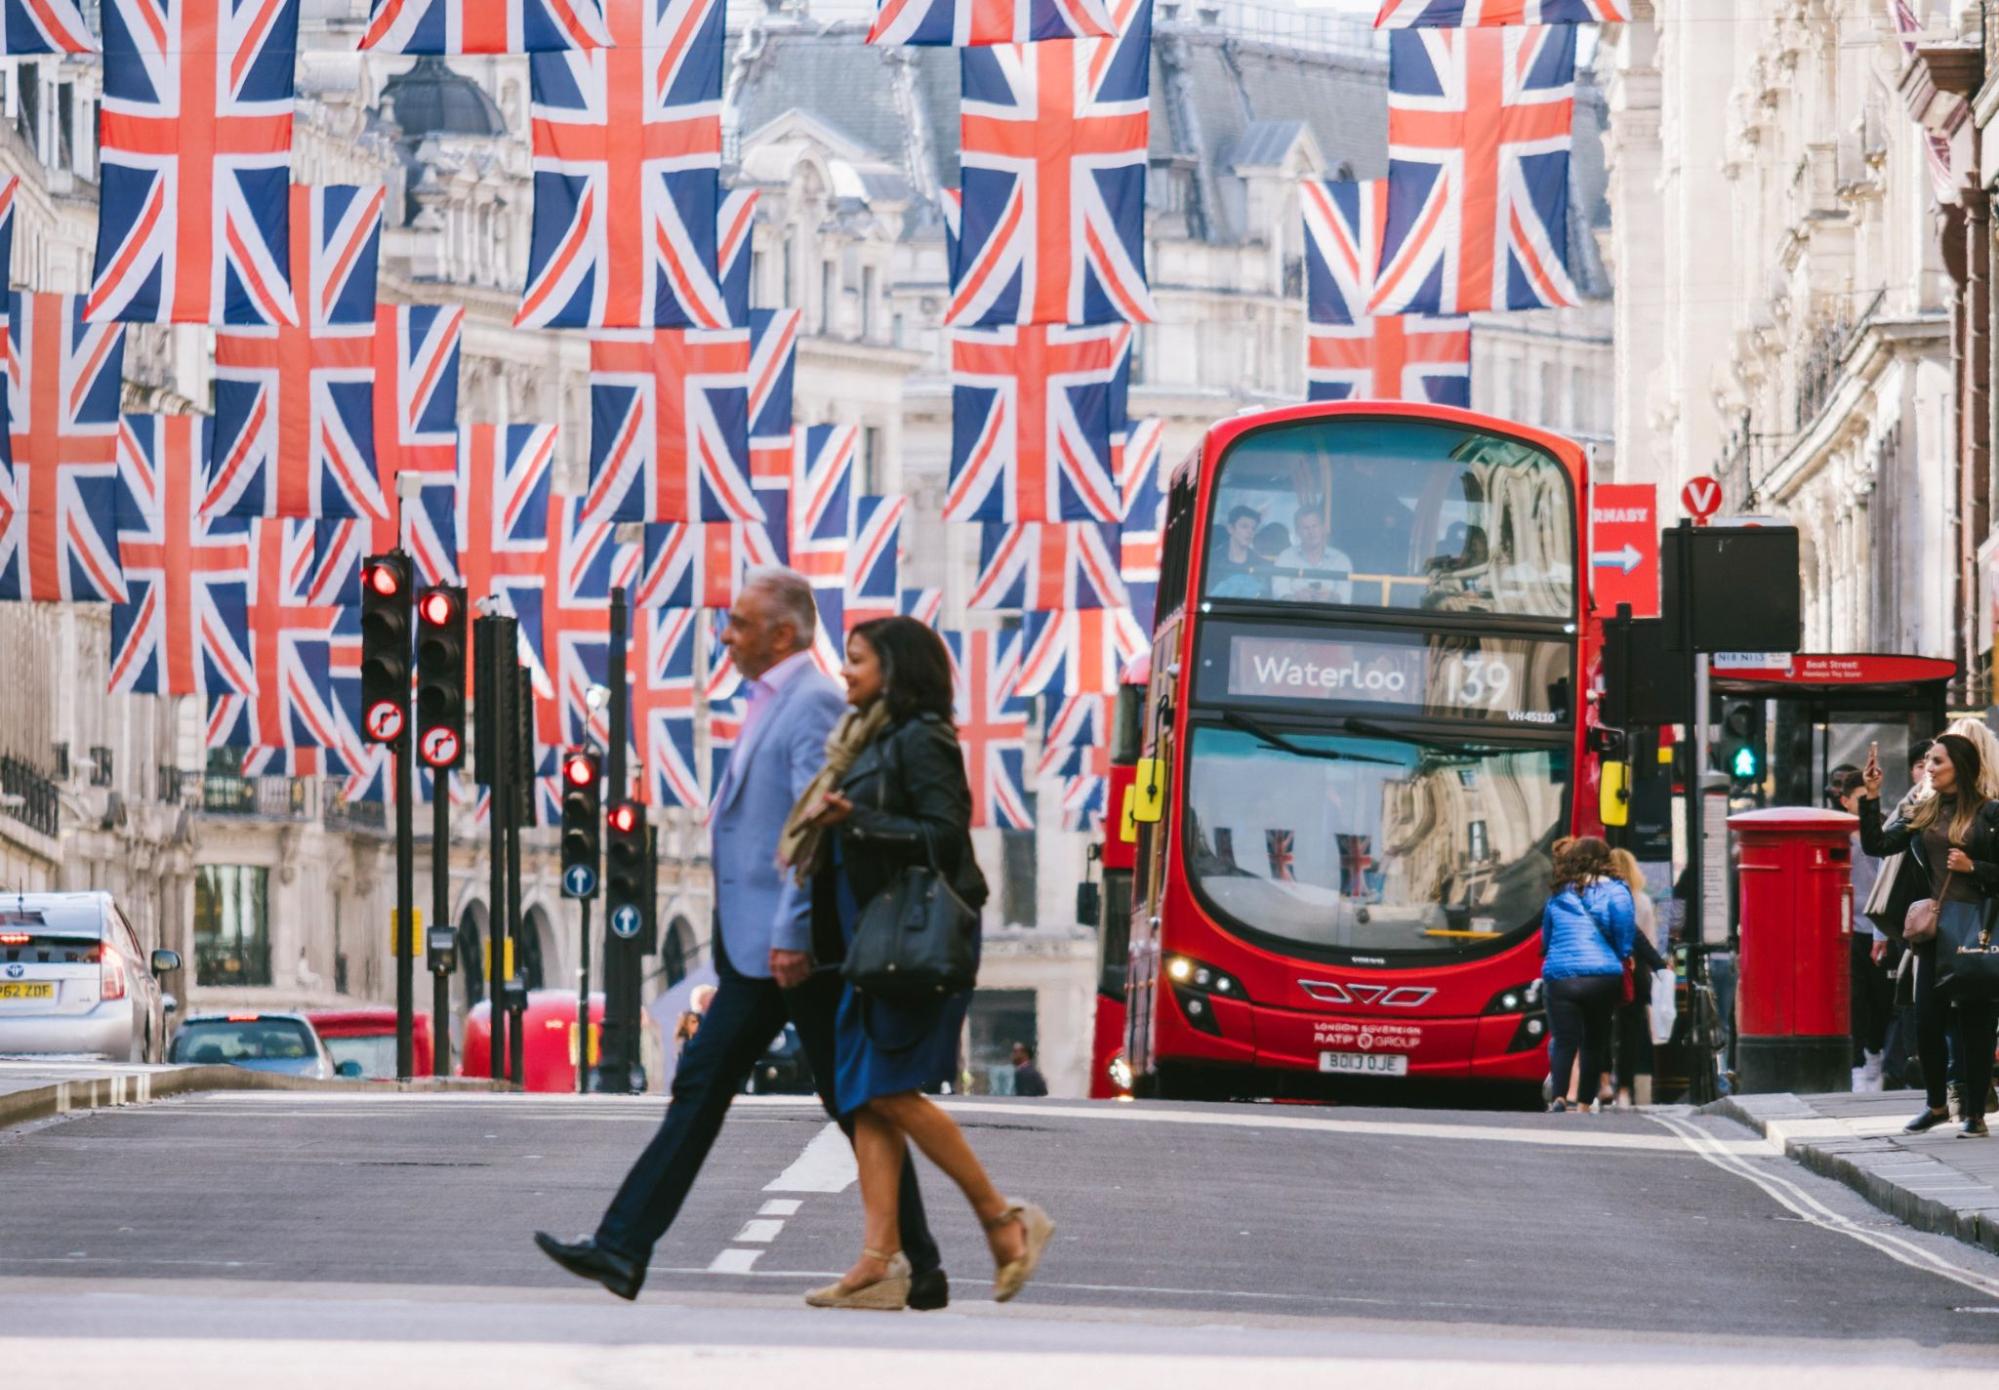 Couple under Union Jack Flags on Regent Street a day before Royal Wedding. The Royal Wedding between Prince Harry and Meghan Markle